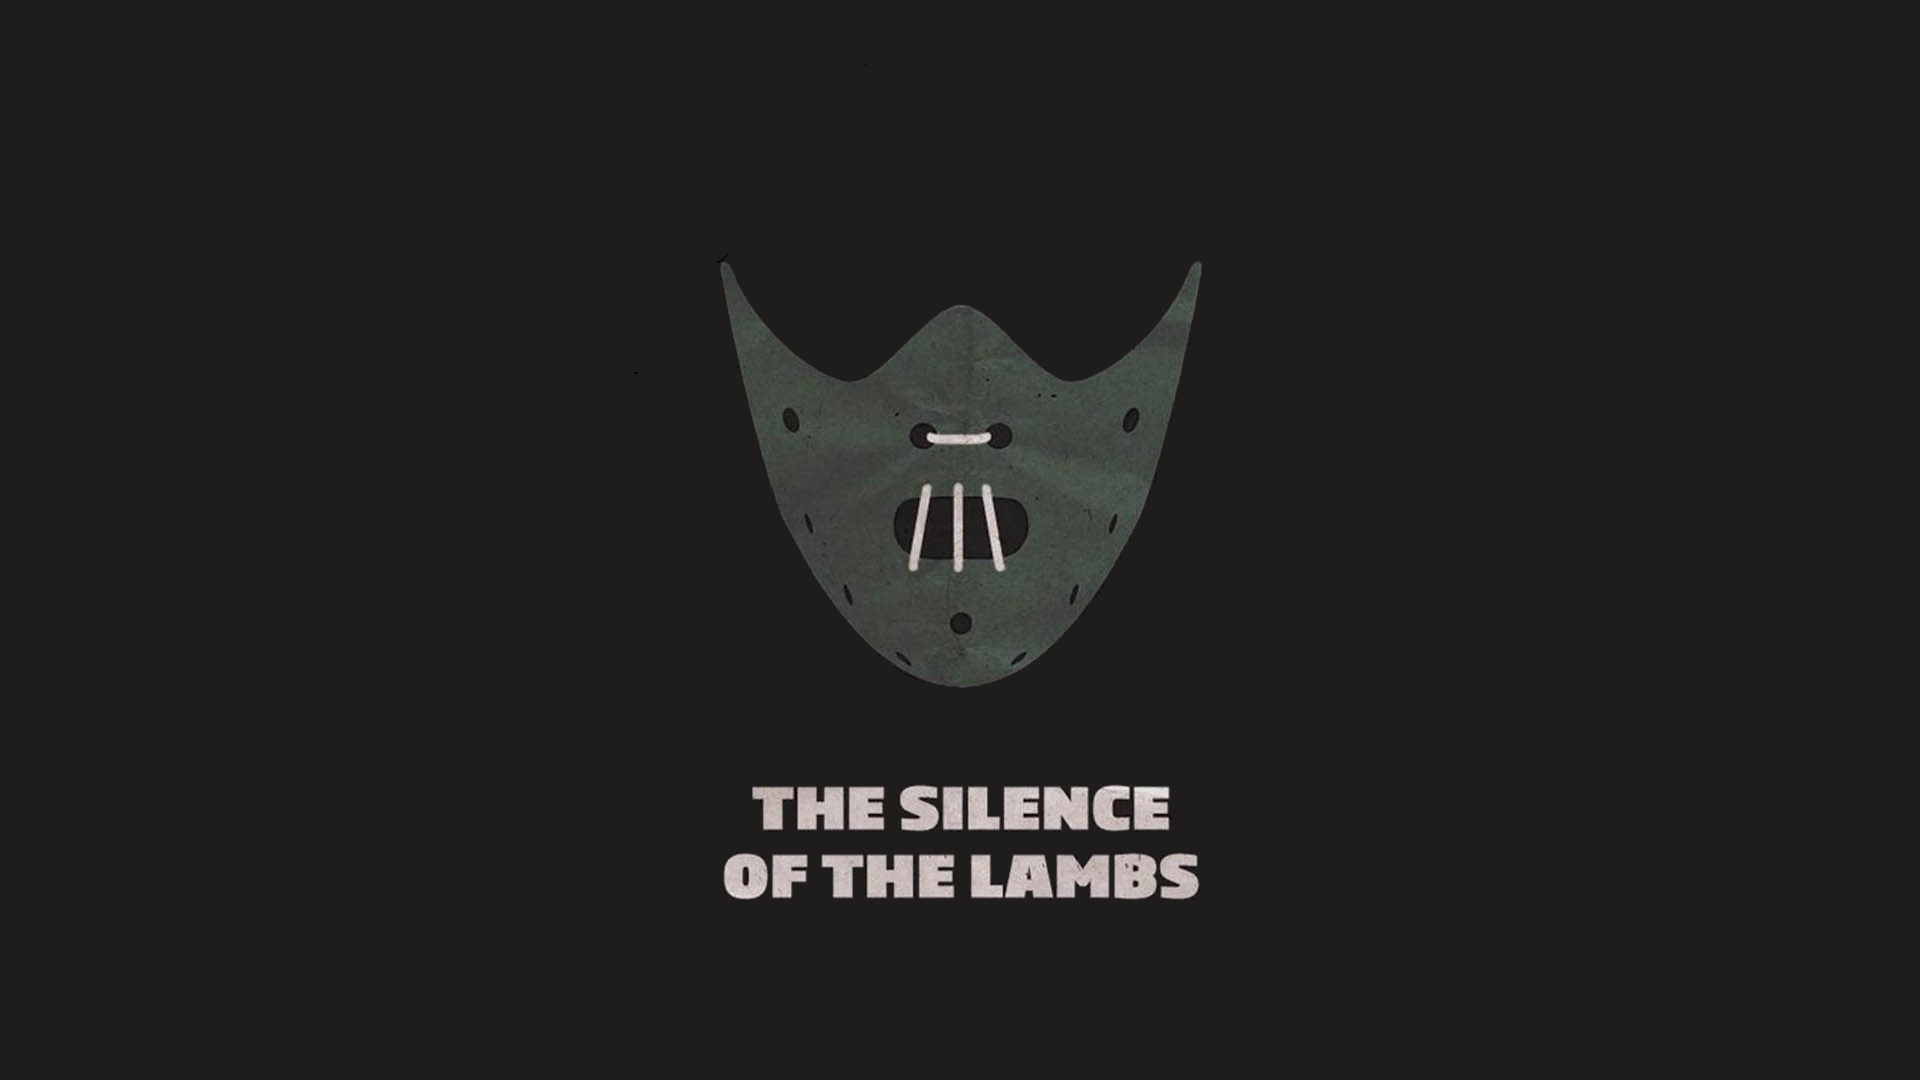 the silence of the lambs, movie, hannibal lecter